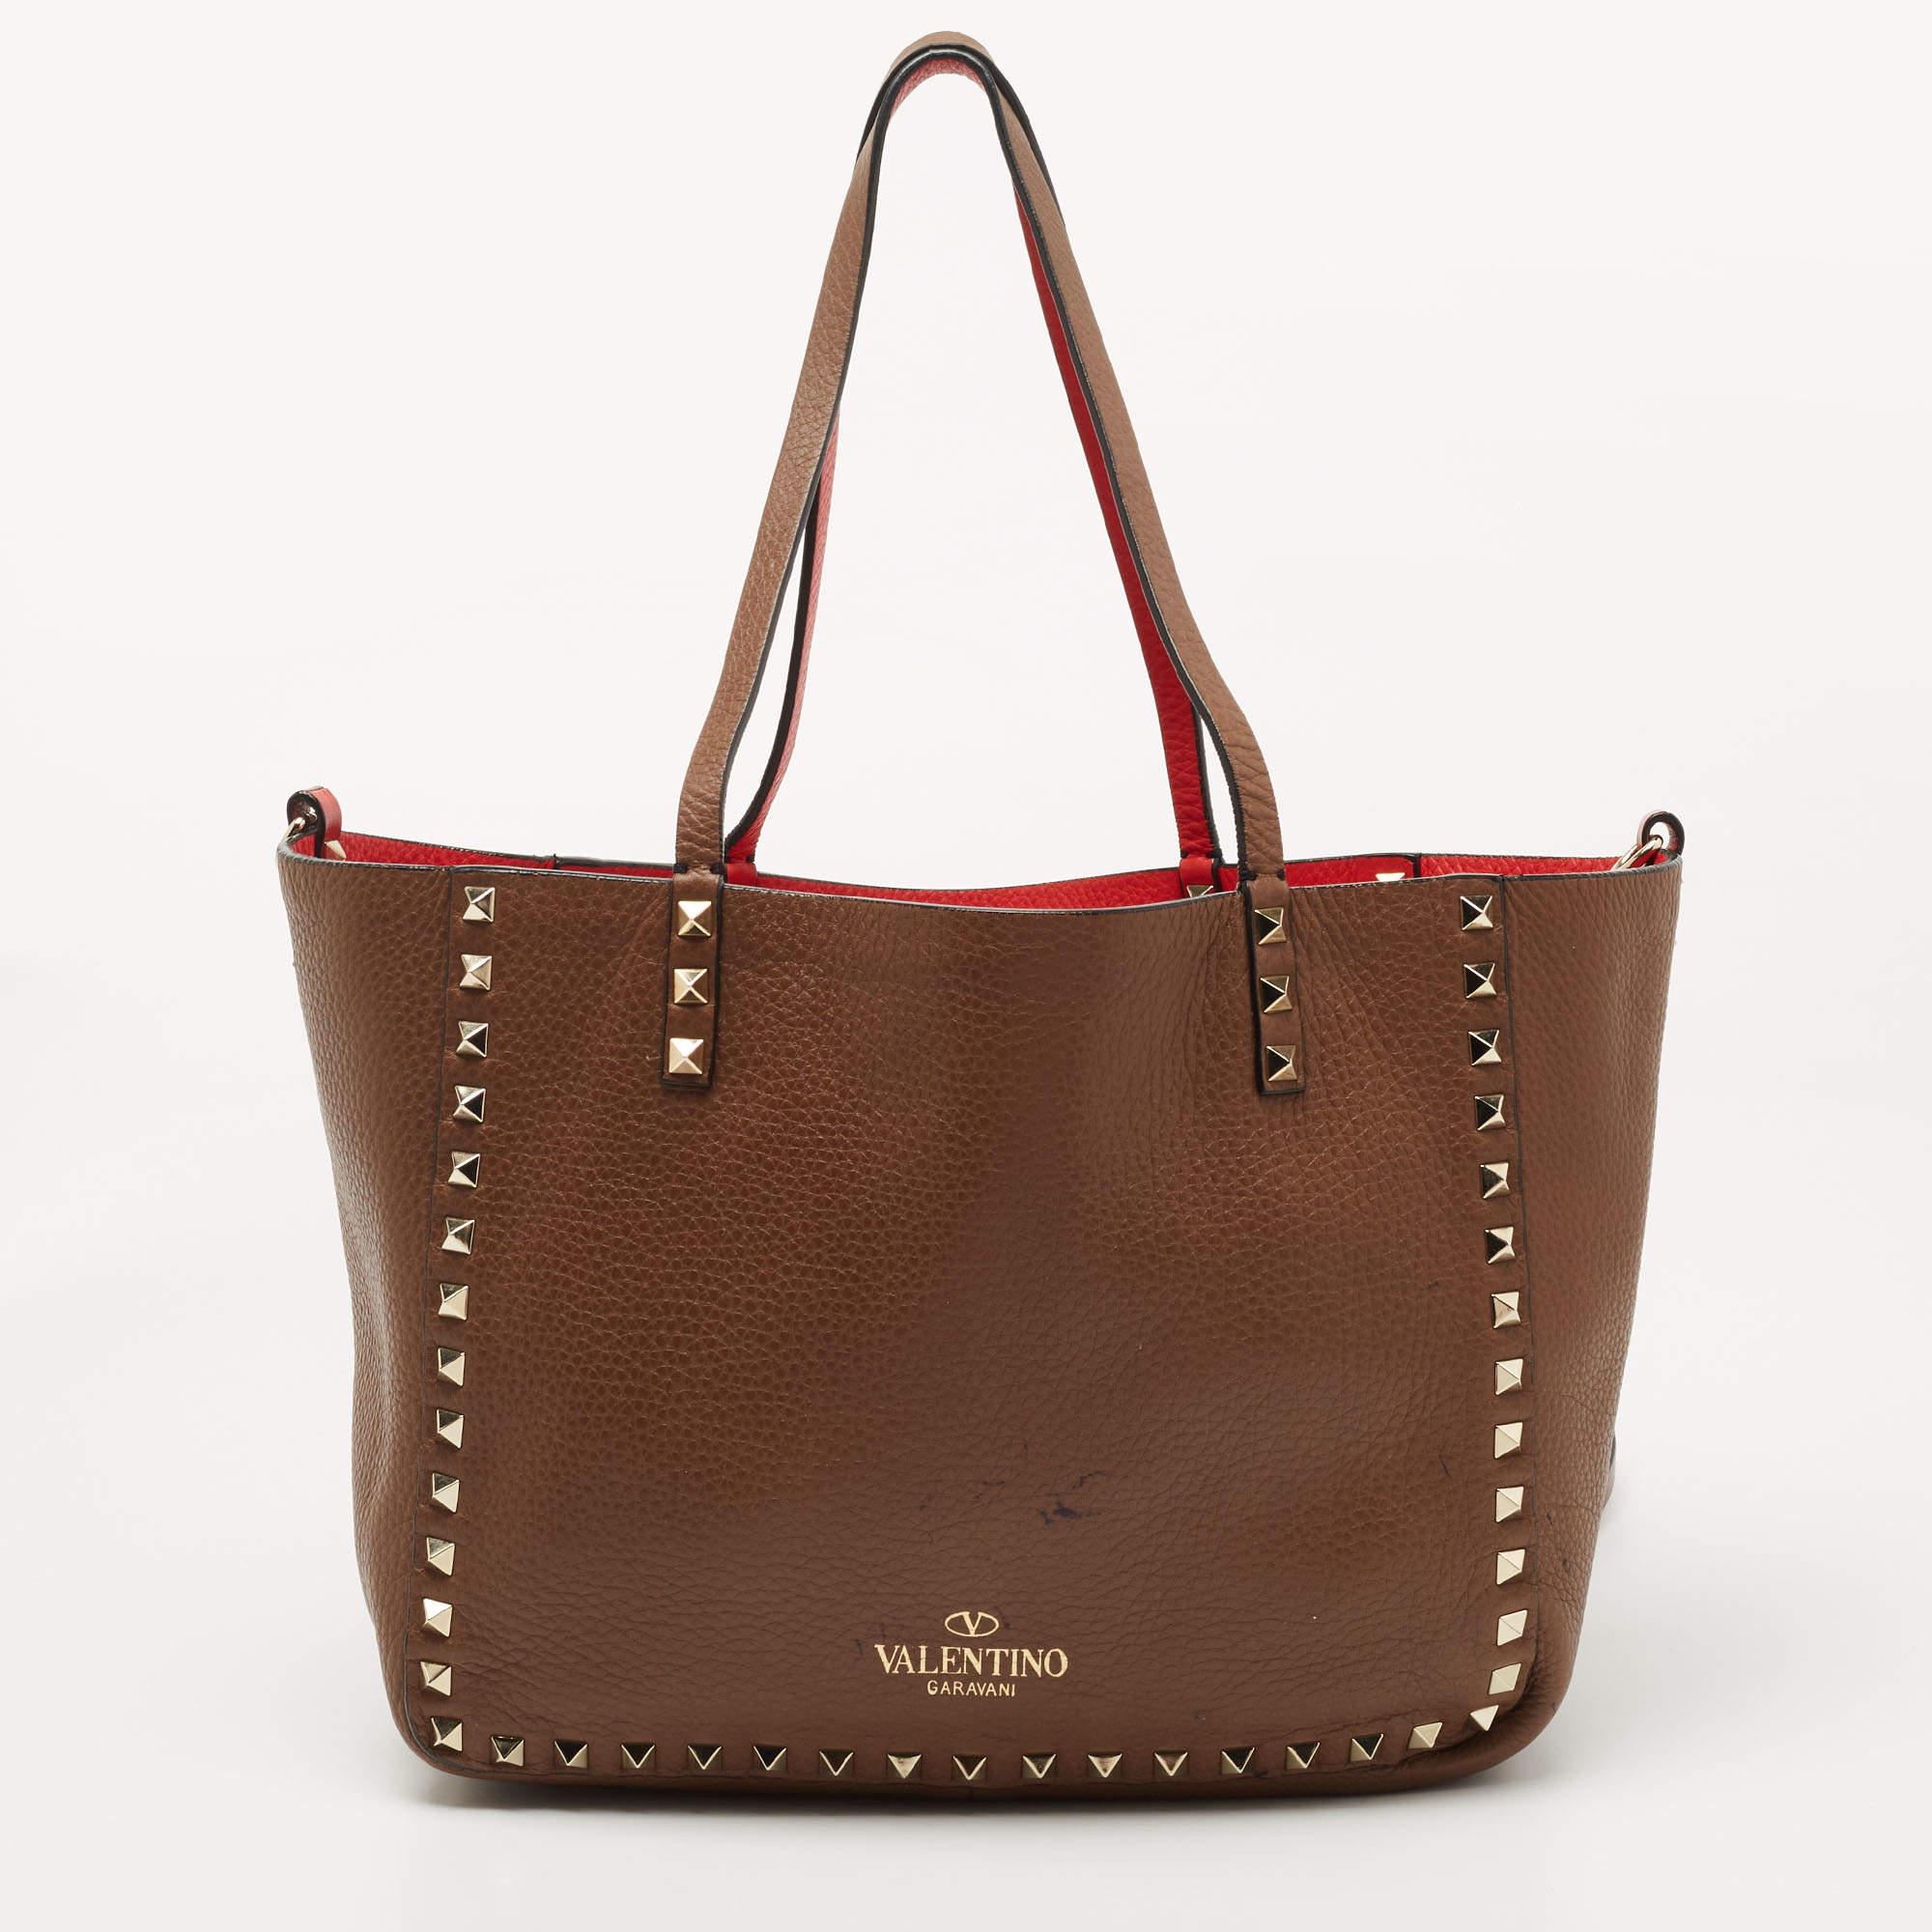 Carry everything you need in style thanks to this Valentino tote. Crafted from the best materials, this is an accessory that promises enduring style and usage.

Includes: Detachable Strap